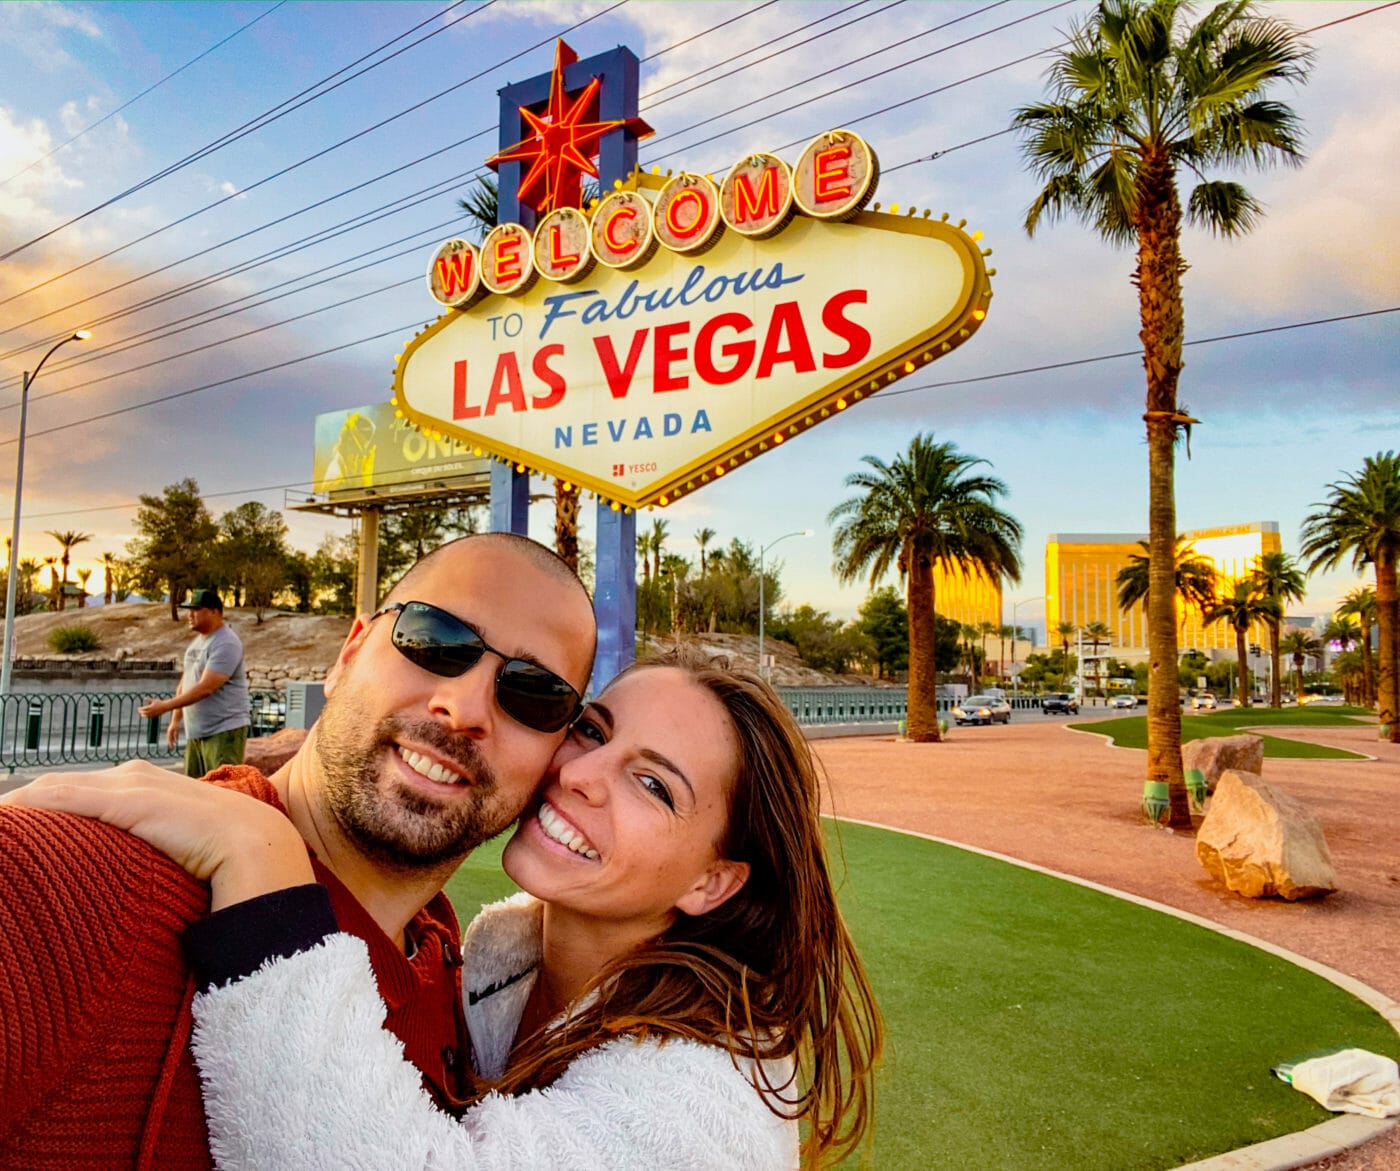 A couple taking a selfie at the Las Vegas Fabulous Welcome Sign